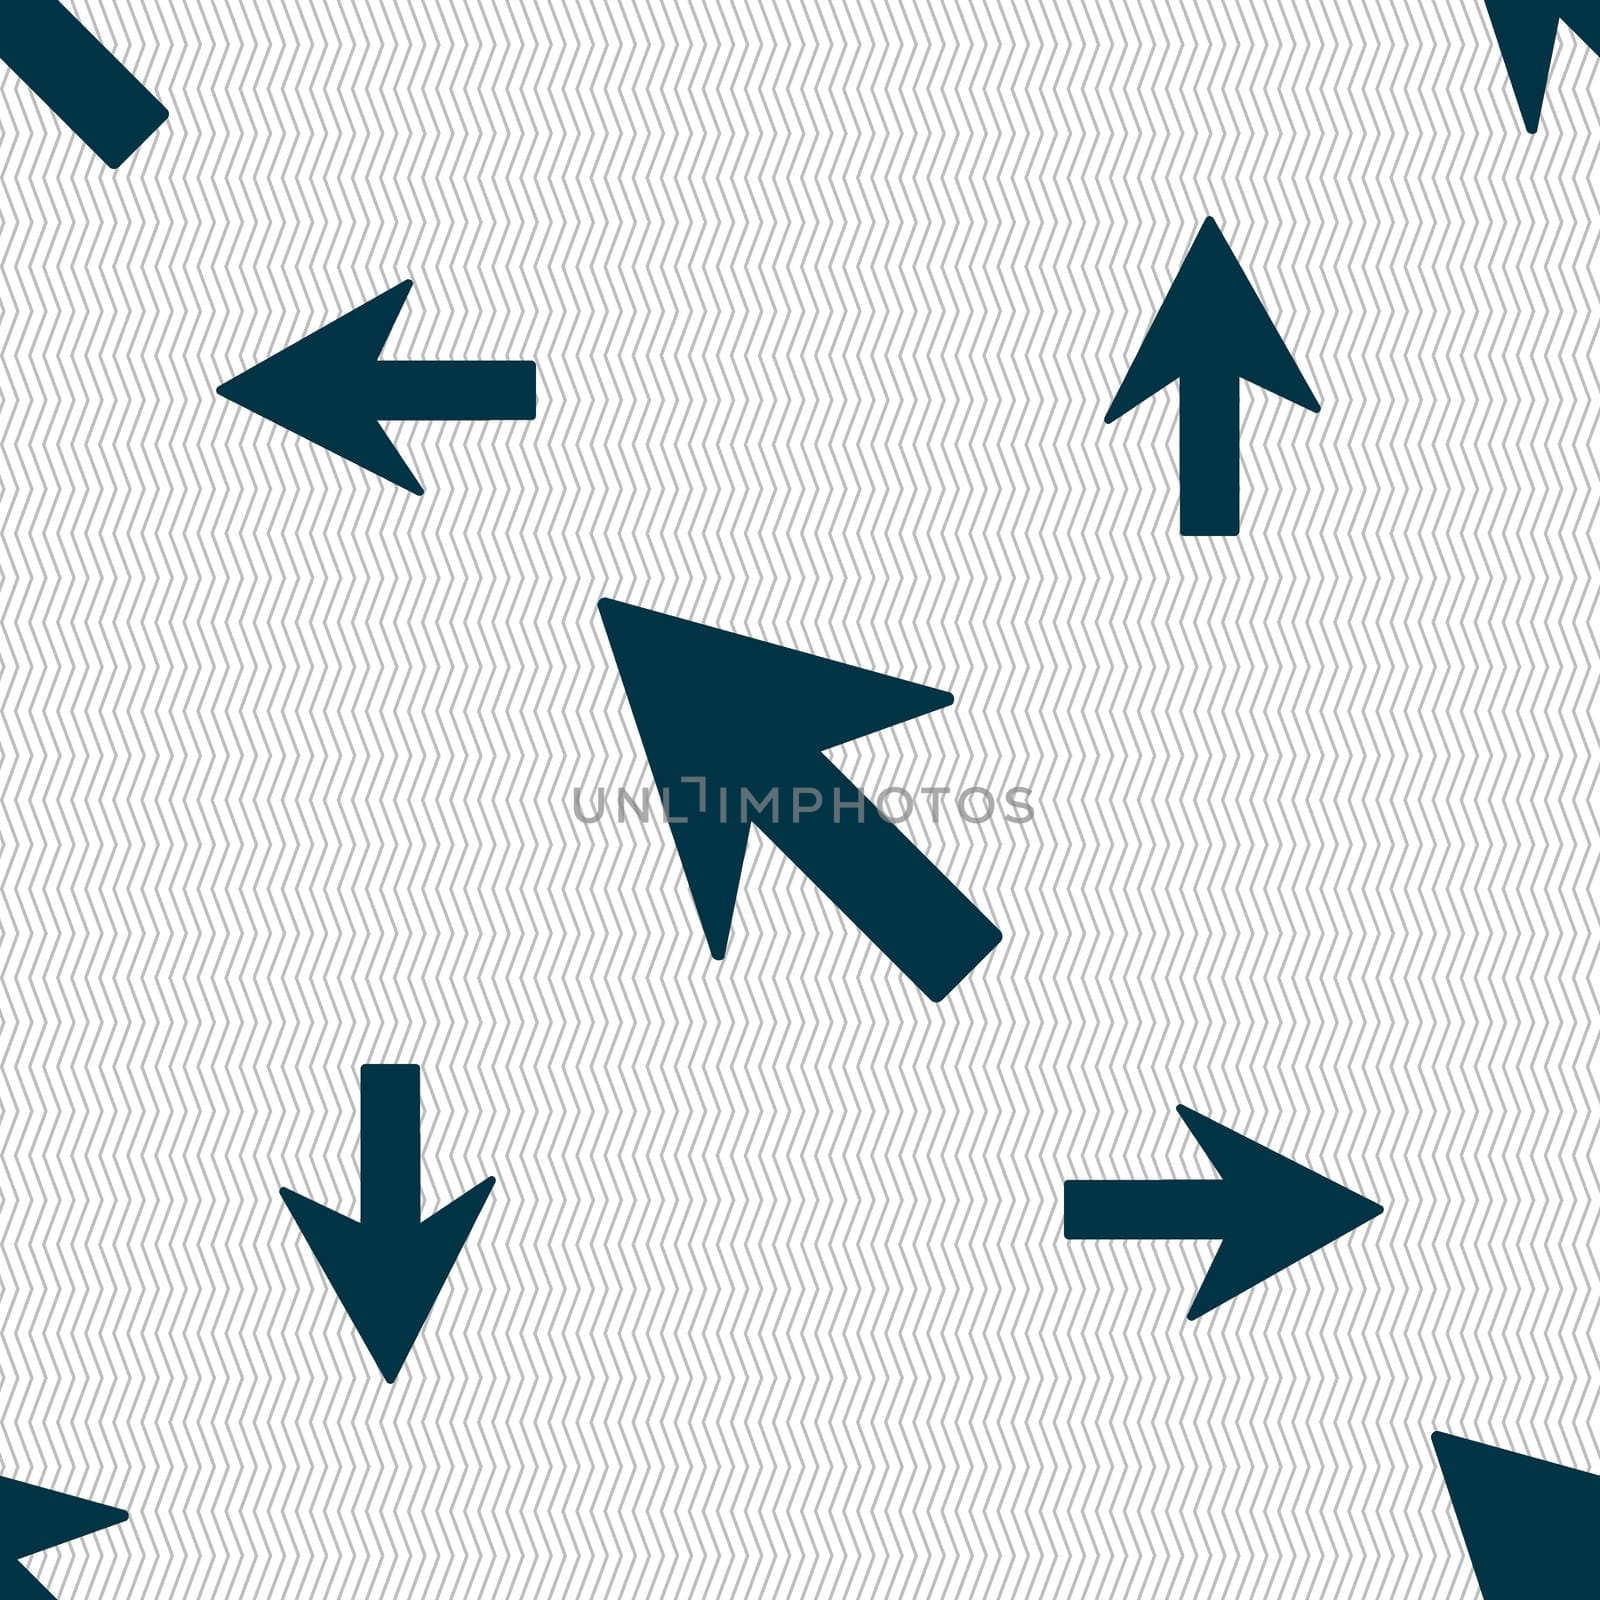 Cursor, arrow icon sign. Seamless pattern with geometric texture. illustration